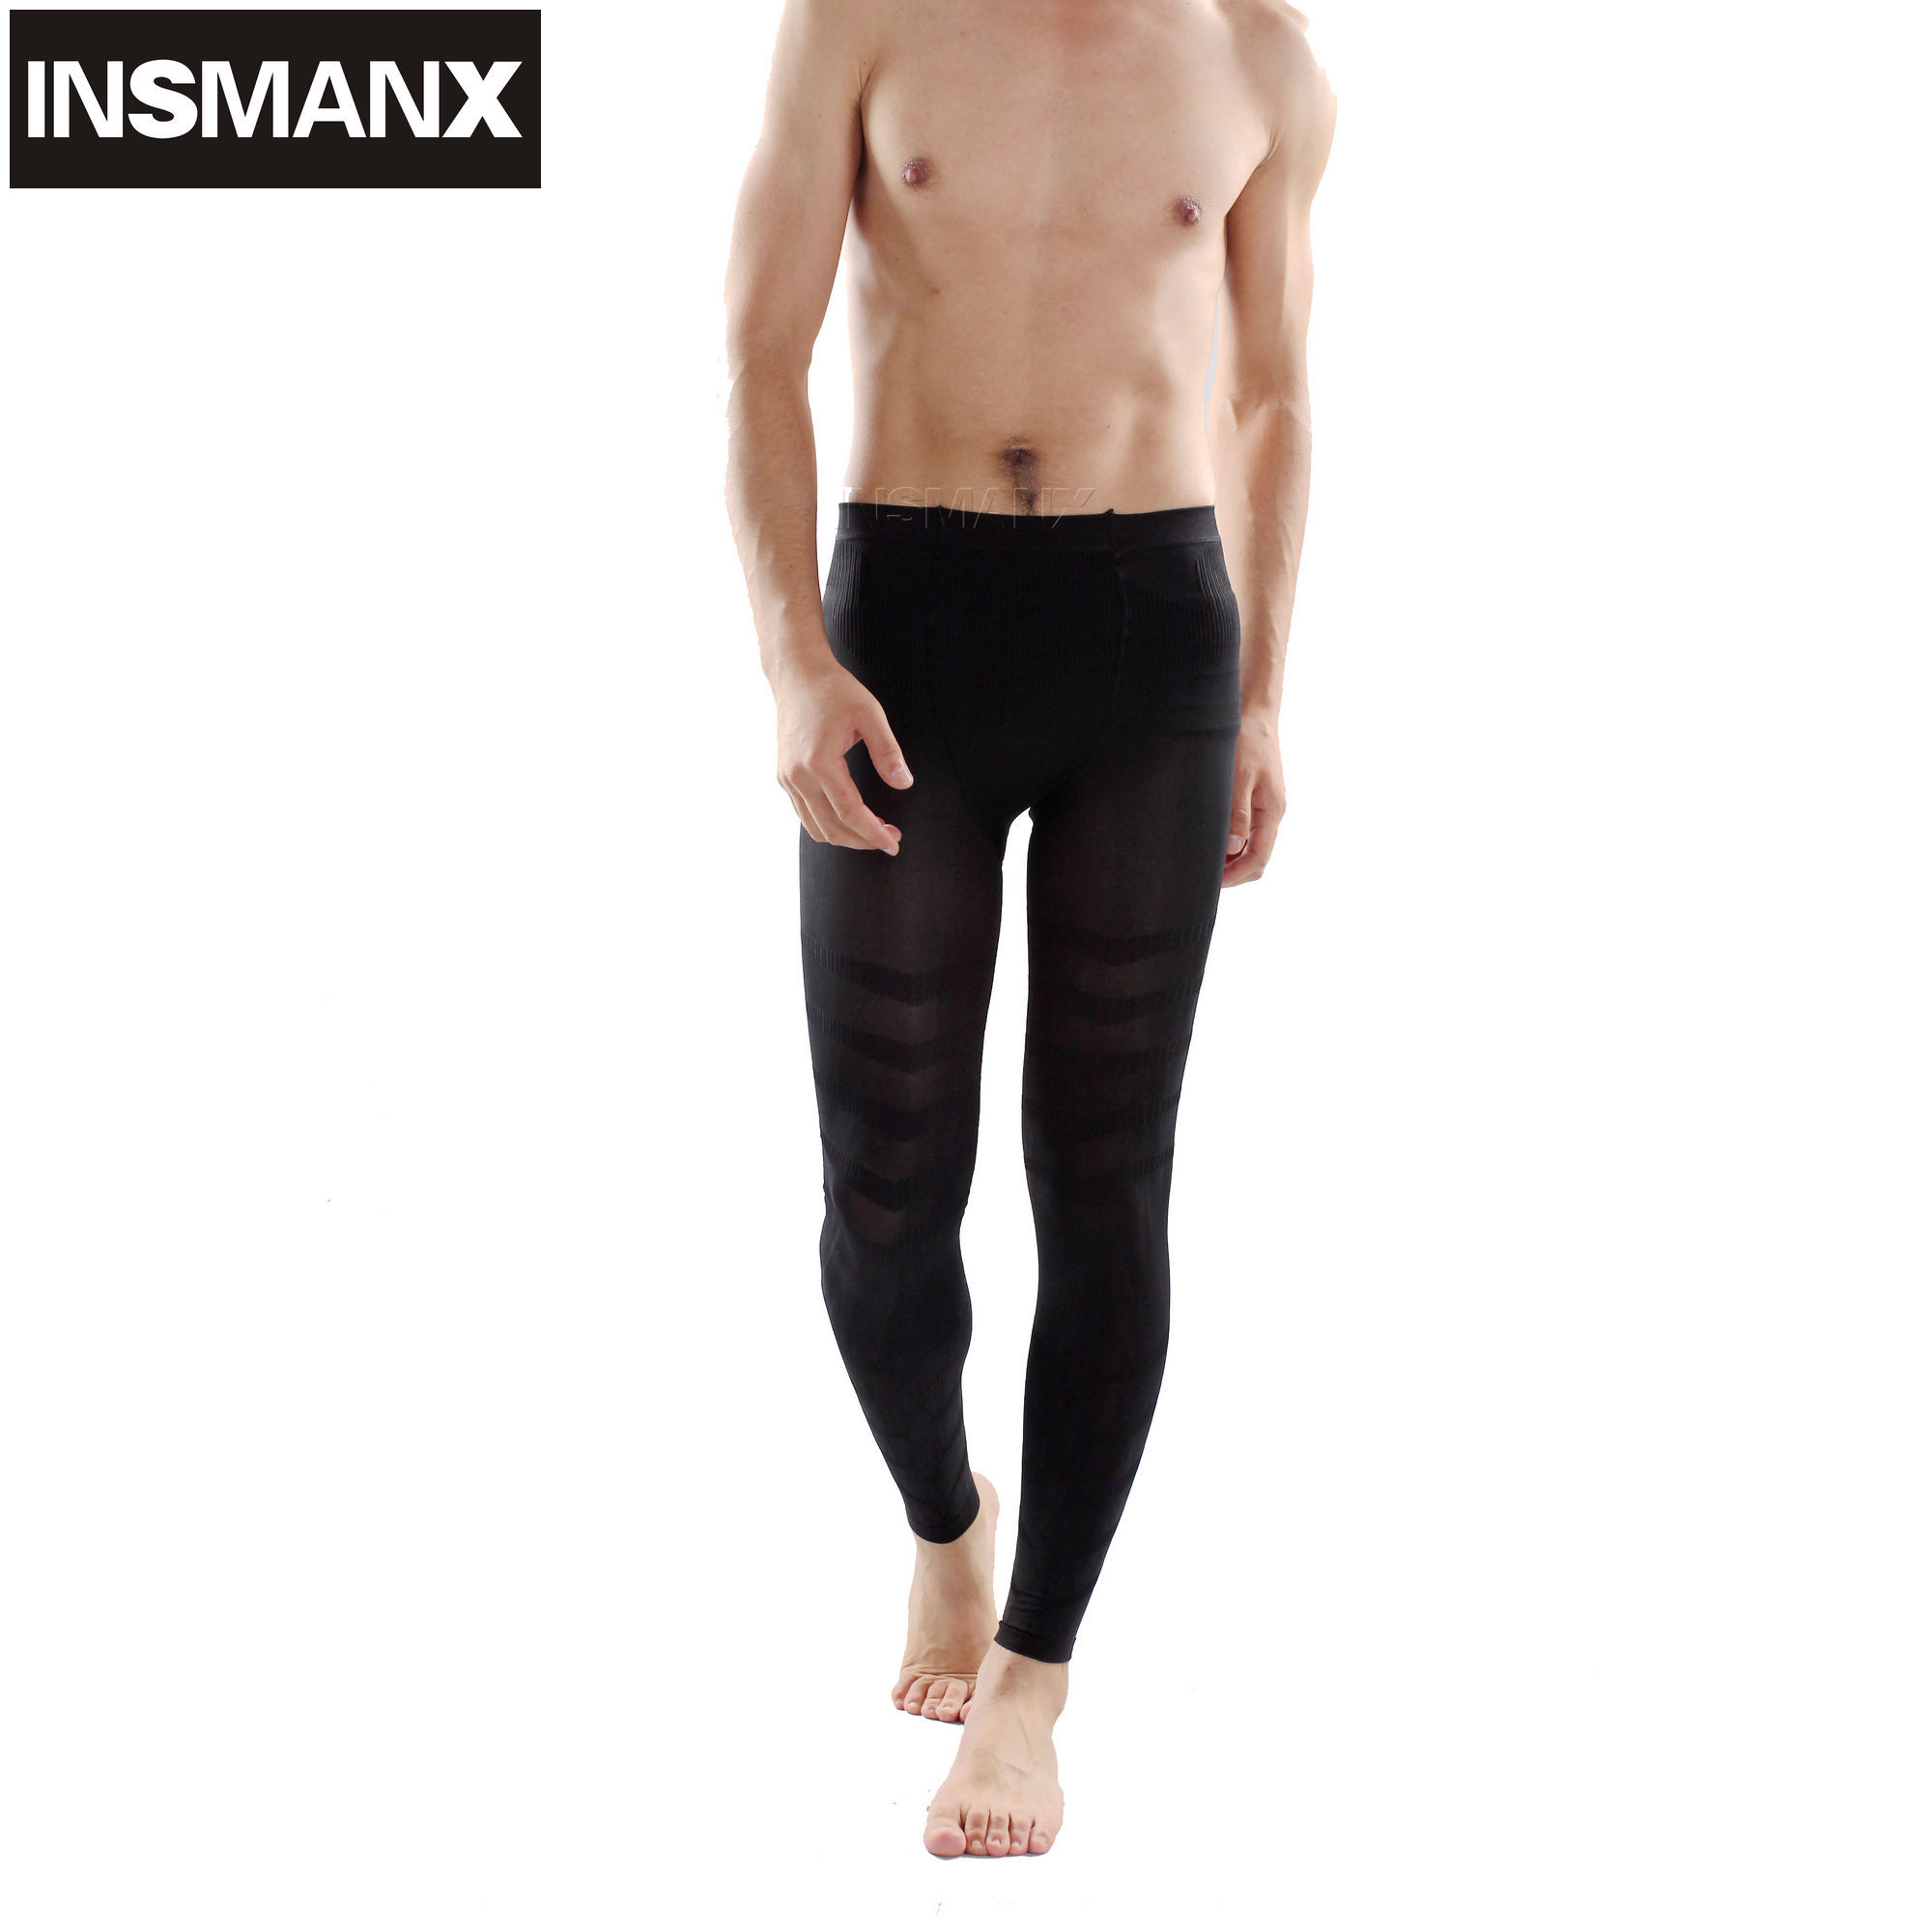 Insmanx male body shaping pants abdomen drawing pants butt-lifting pants male ankle length trousers tight stovepipe long johns